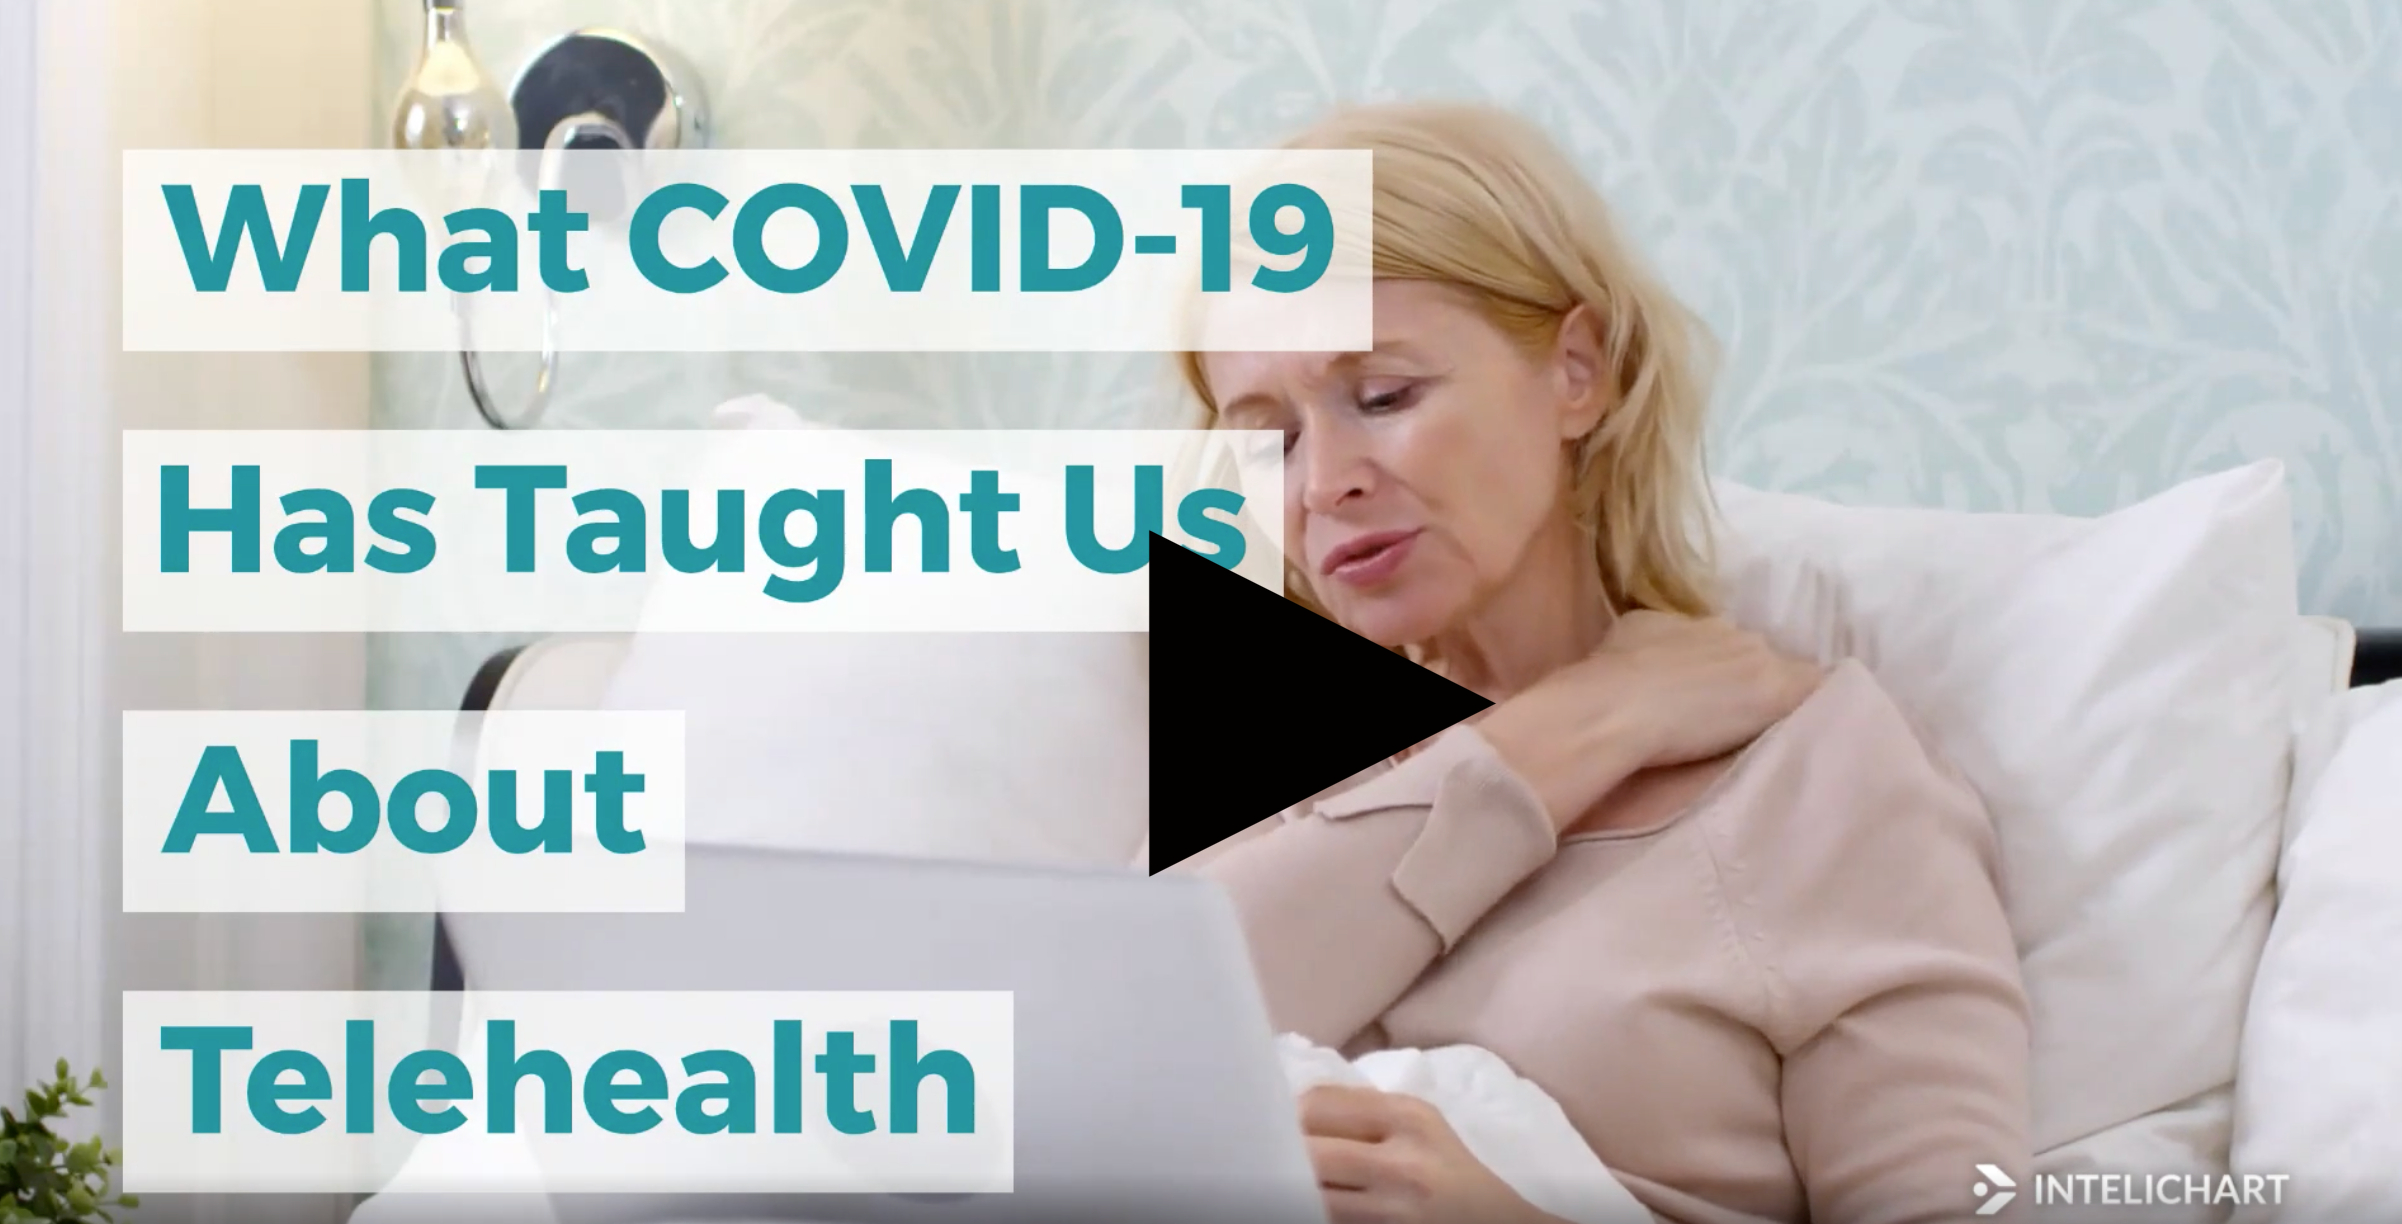 What COVID-19 Has Taught Us About Telehealth